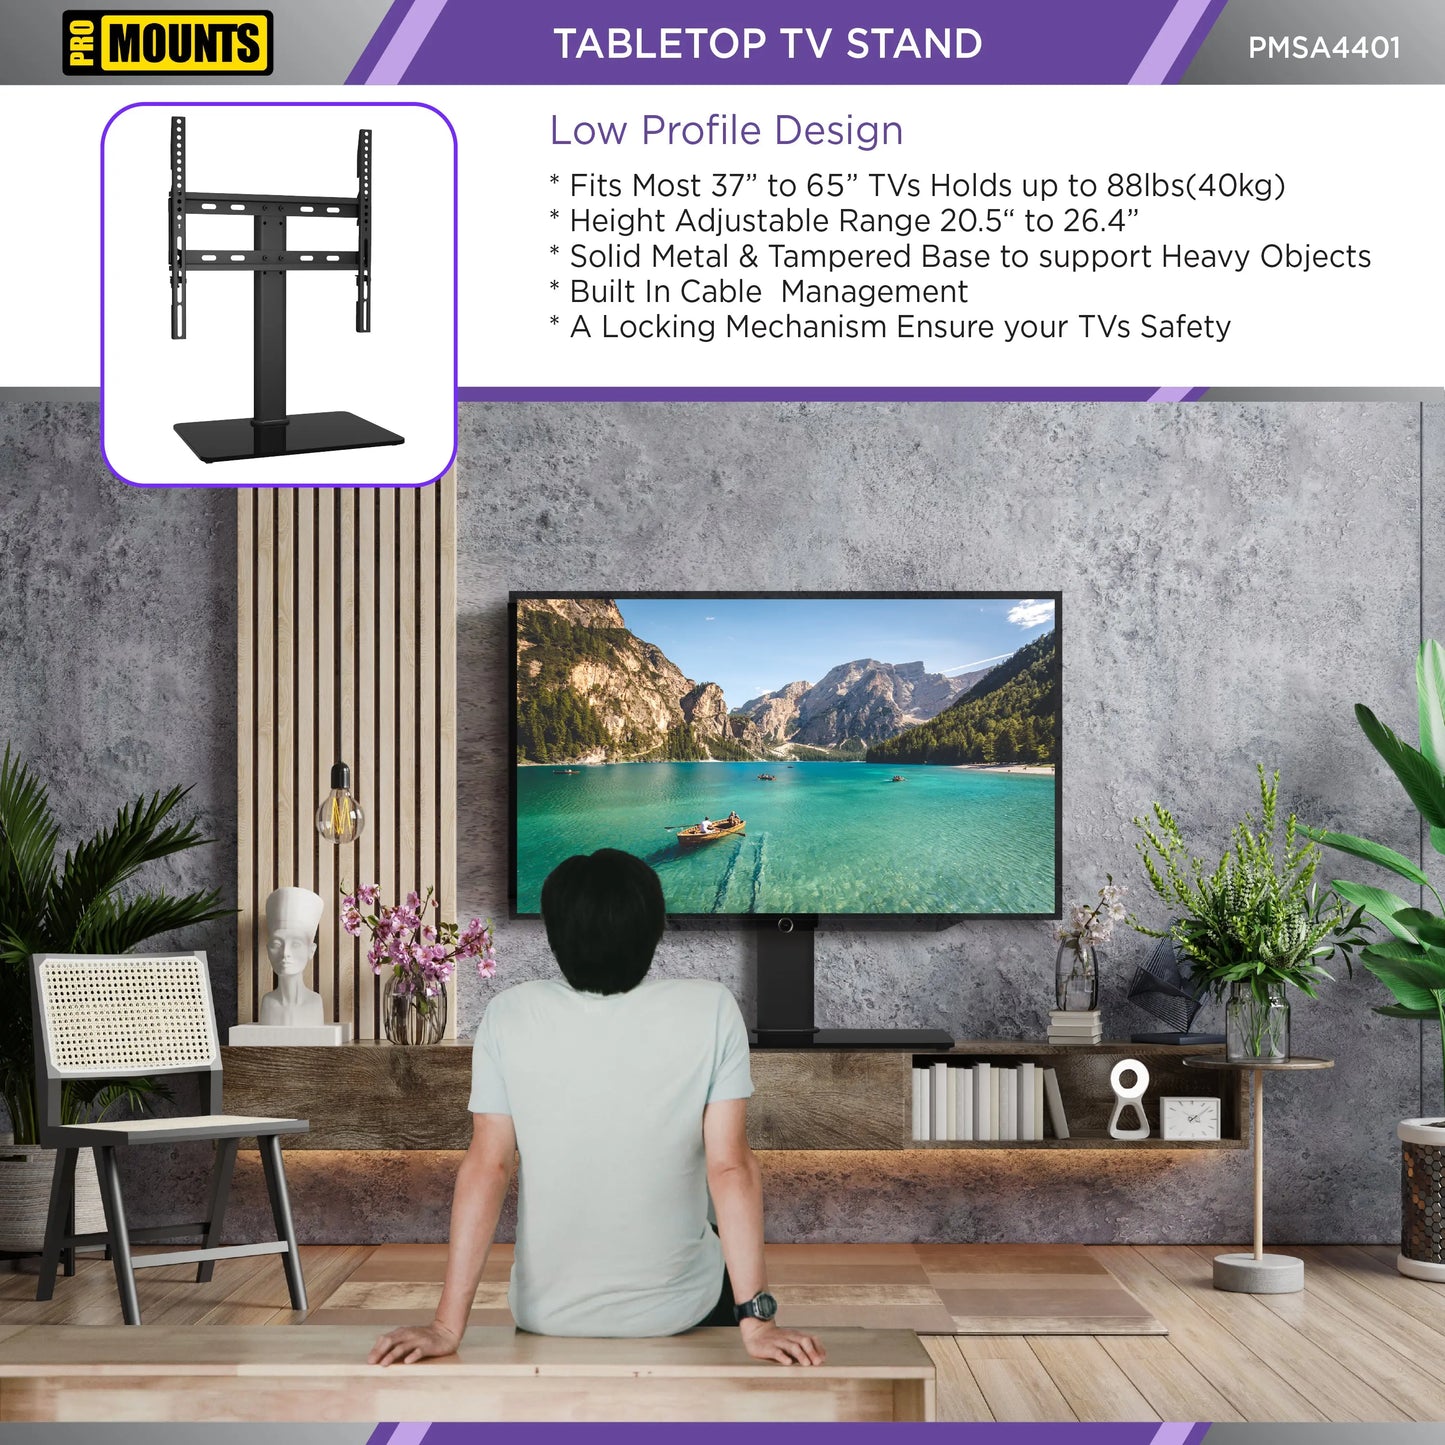 ProMounts Tabletop TV Stand Mount for 37"-65 TVs Holds up to 88lbs